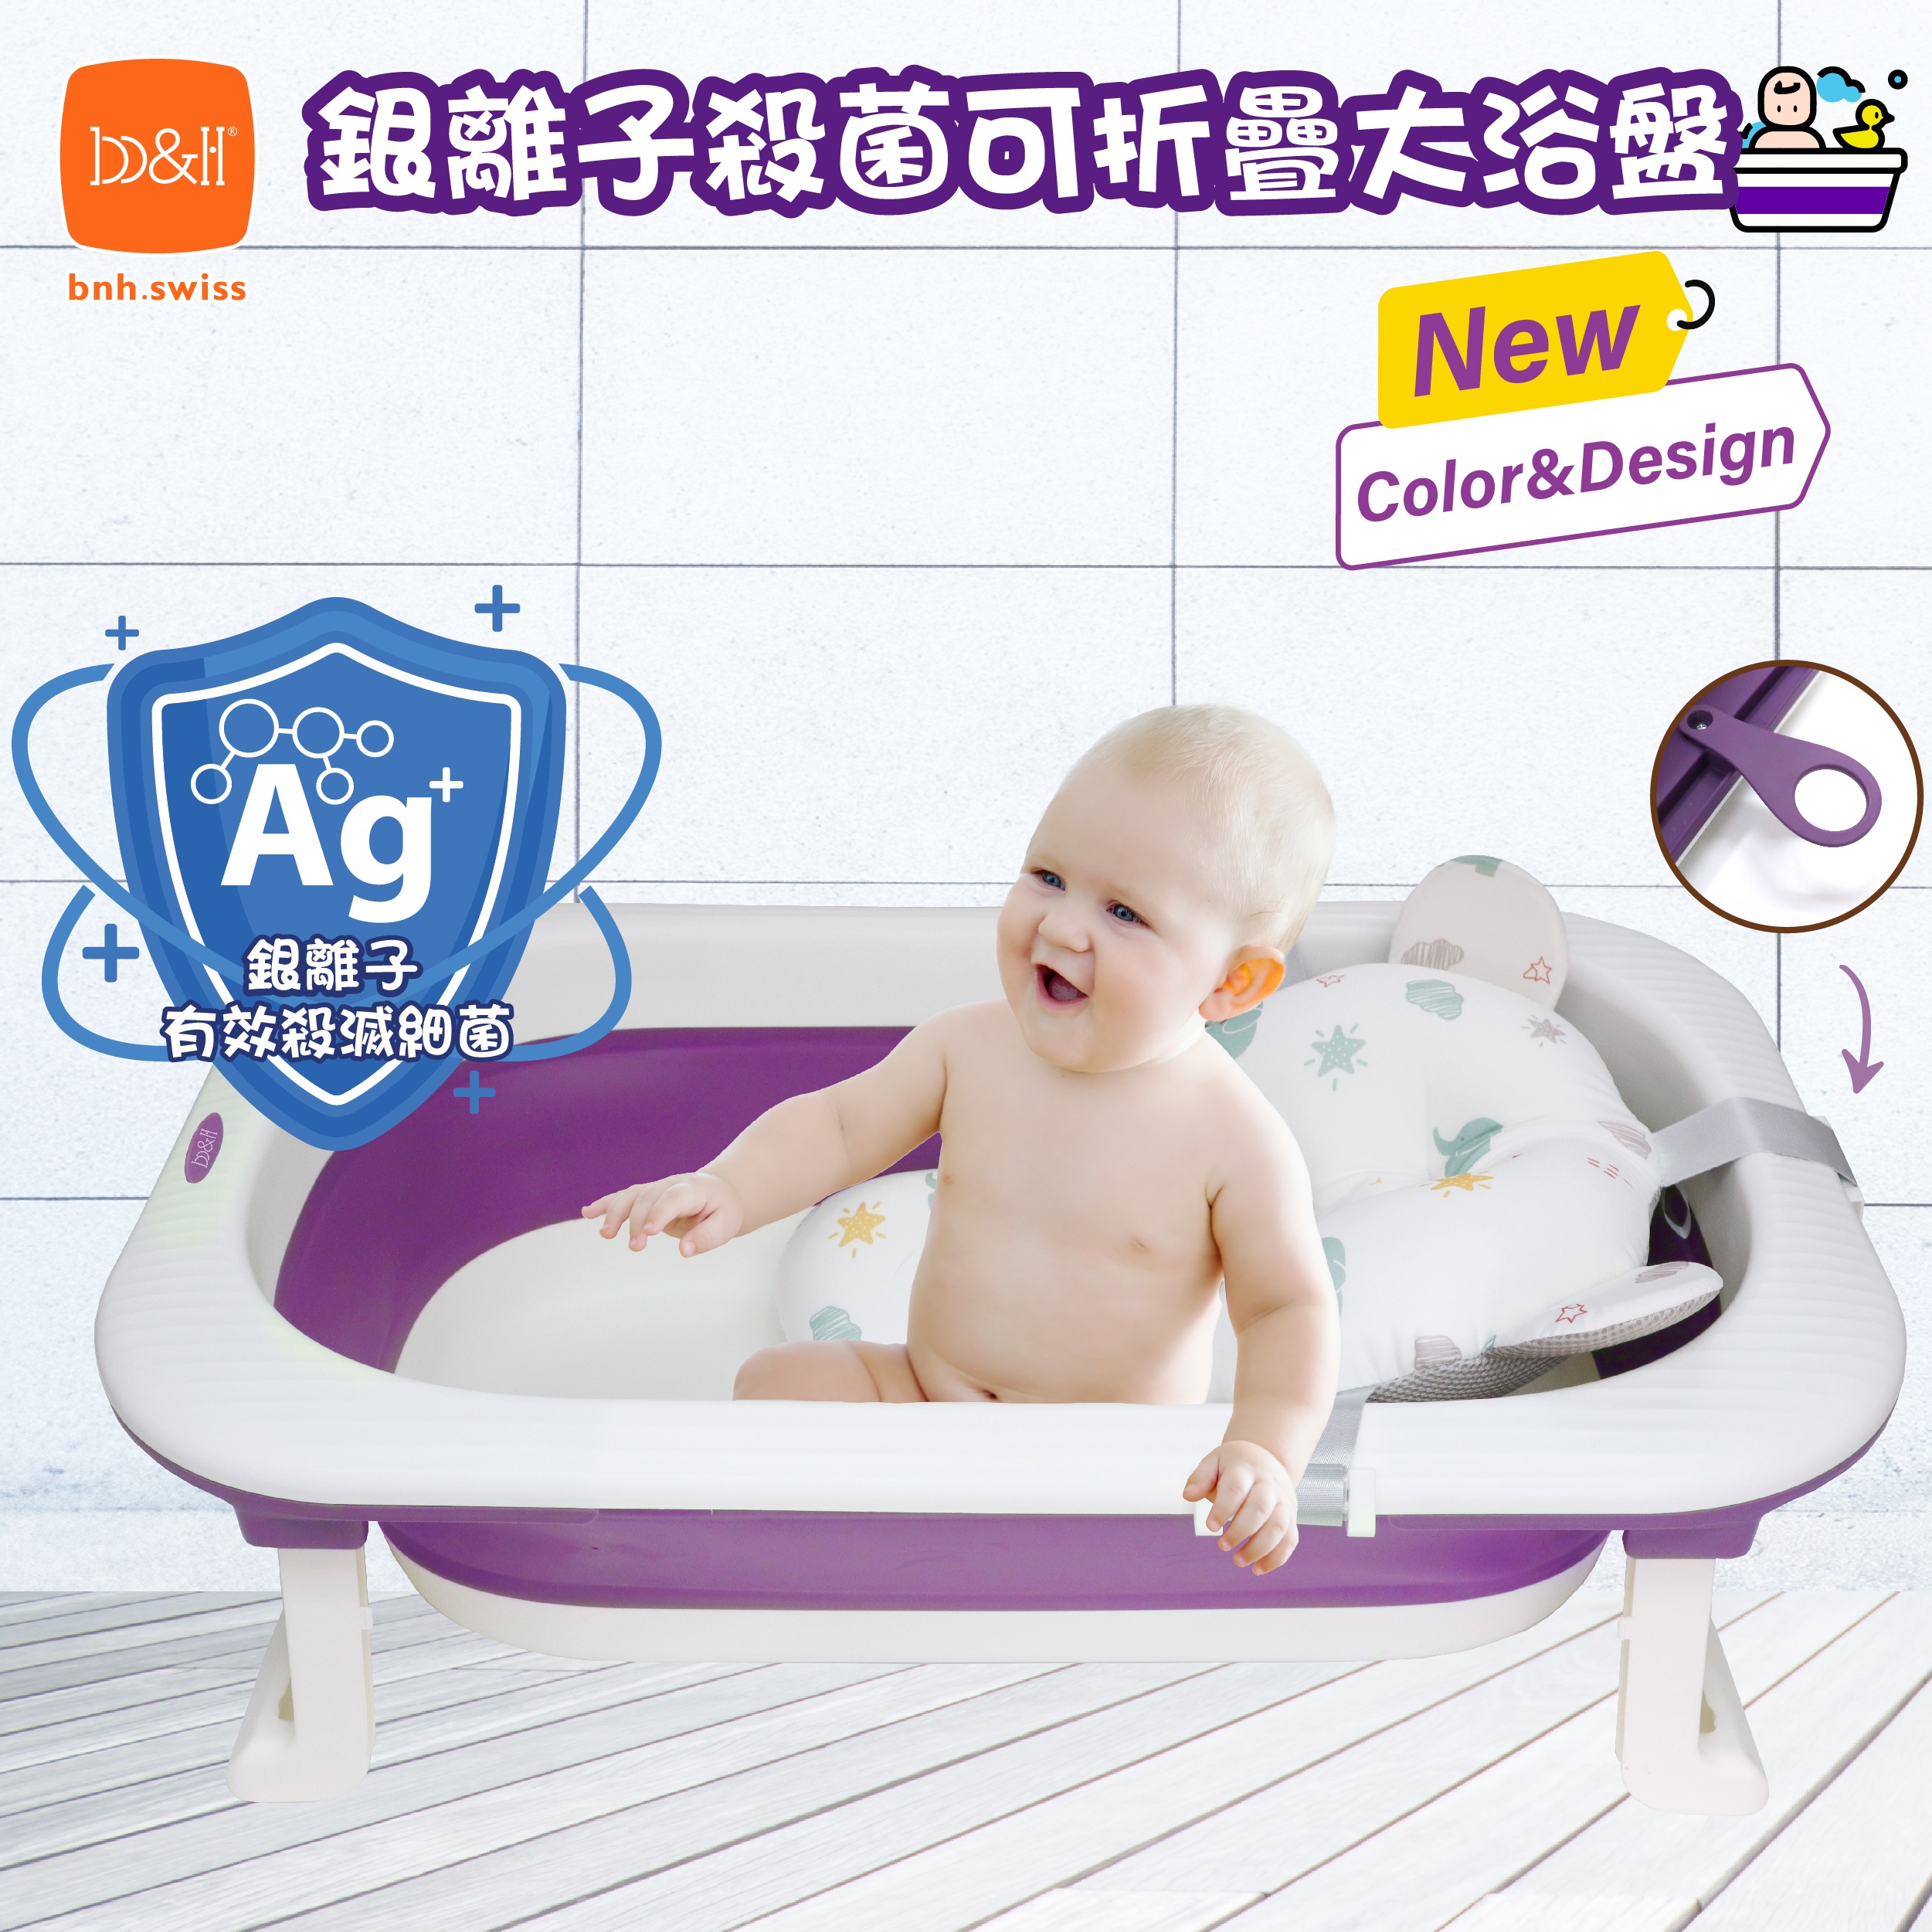 Twistshake - Our foldable bath tub are suitable for newborns up to